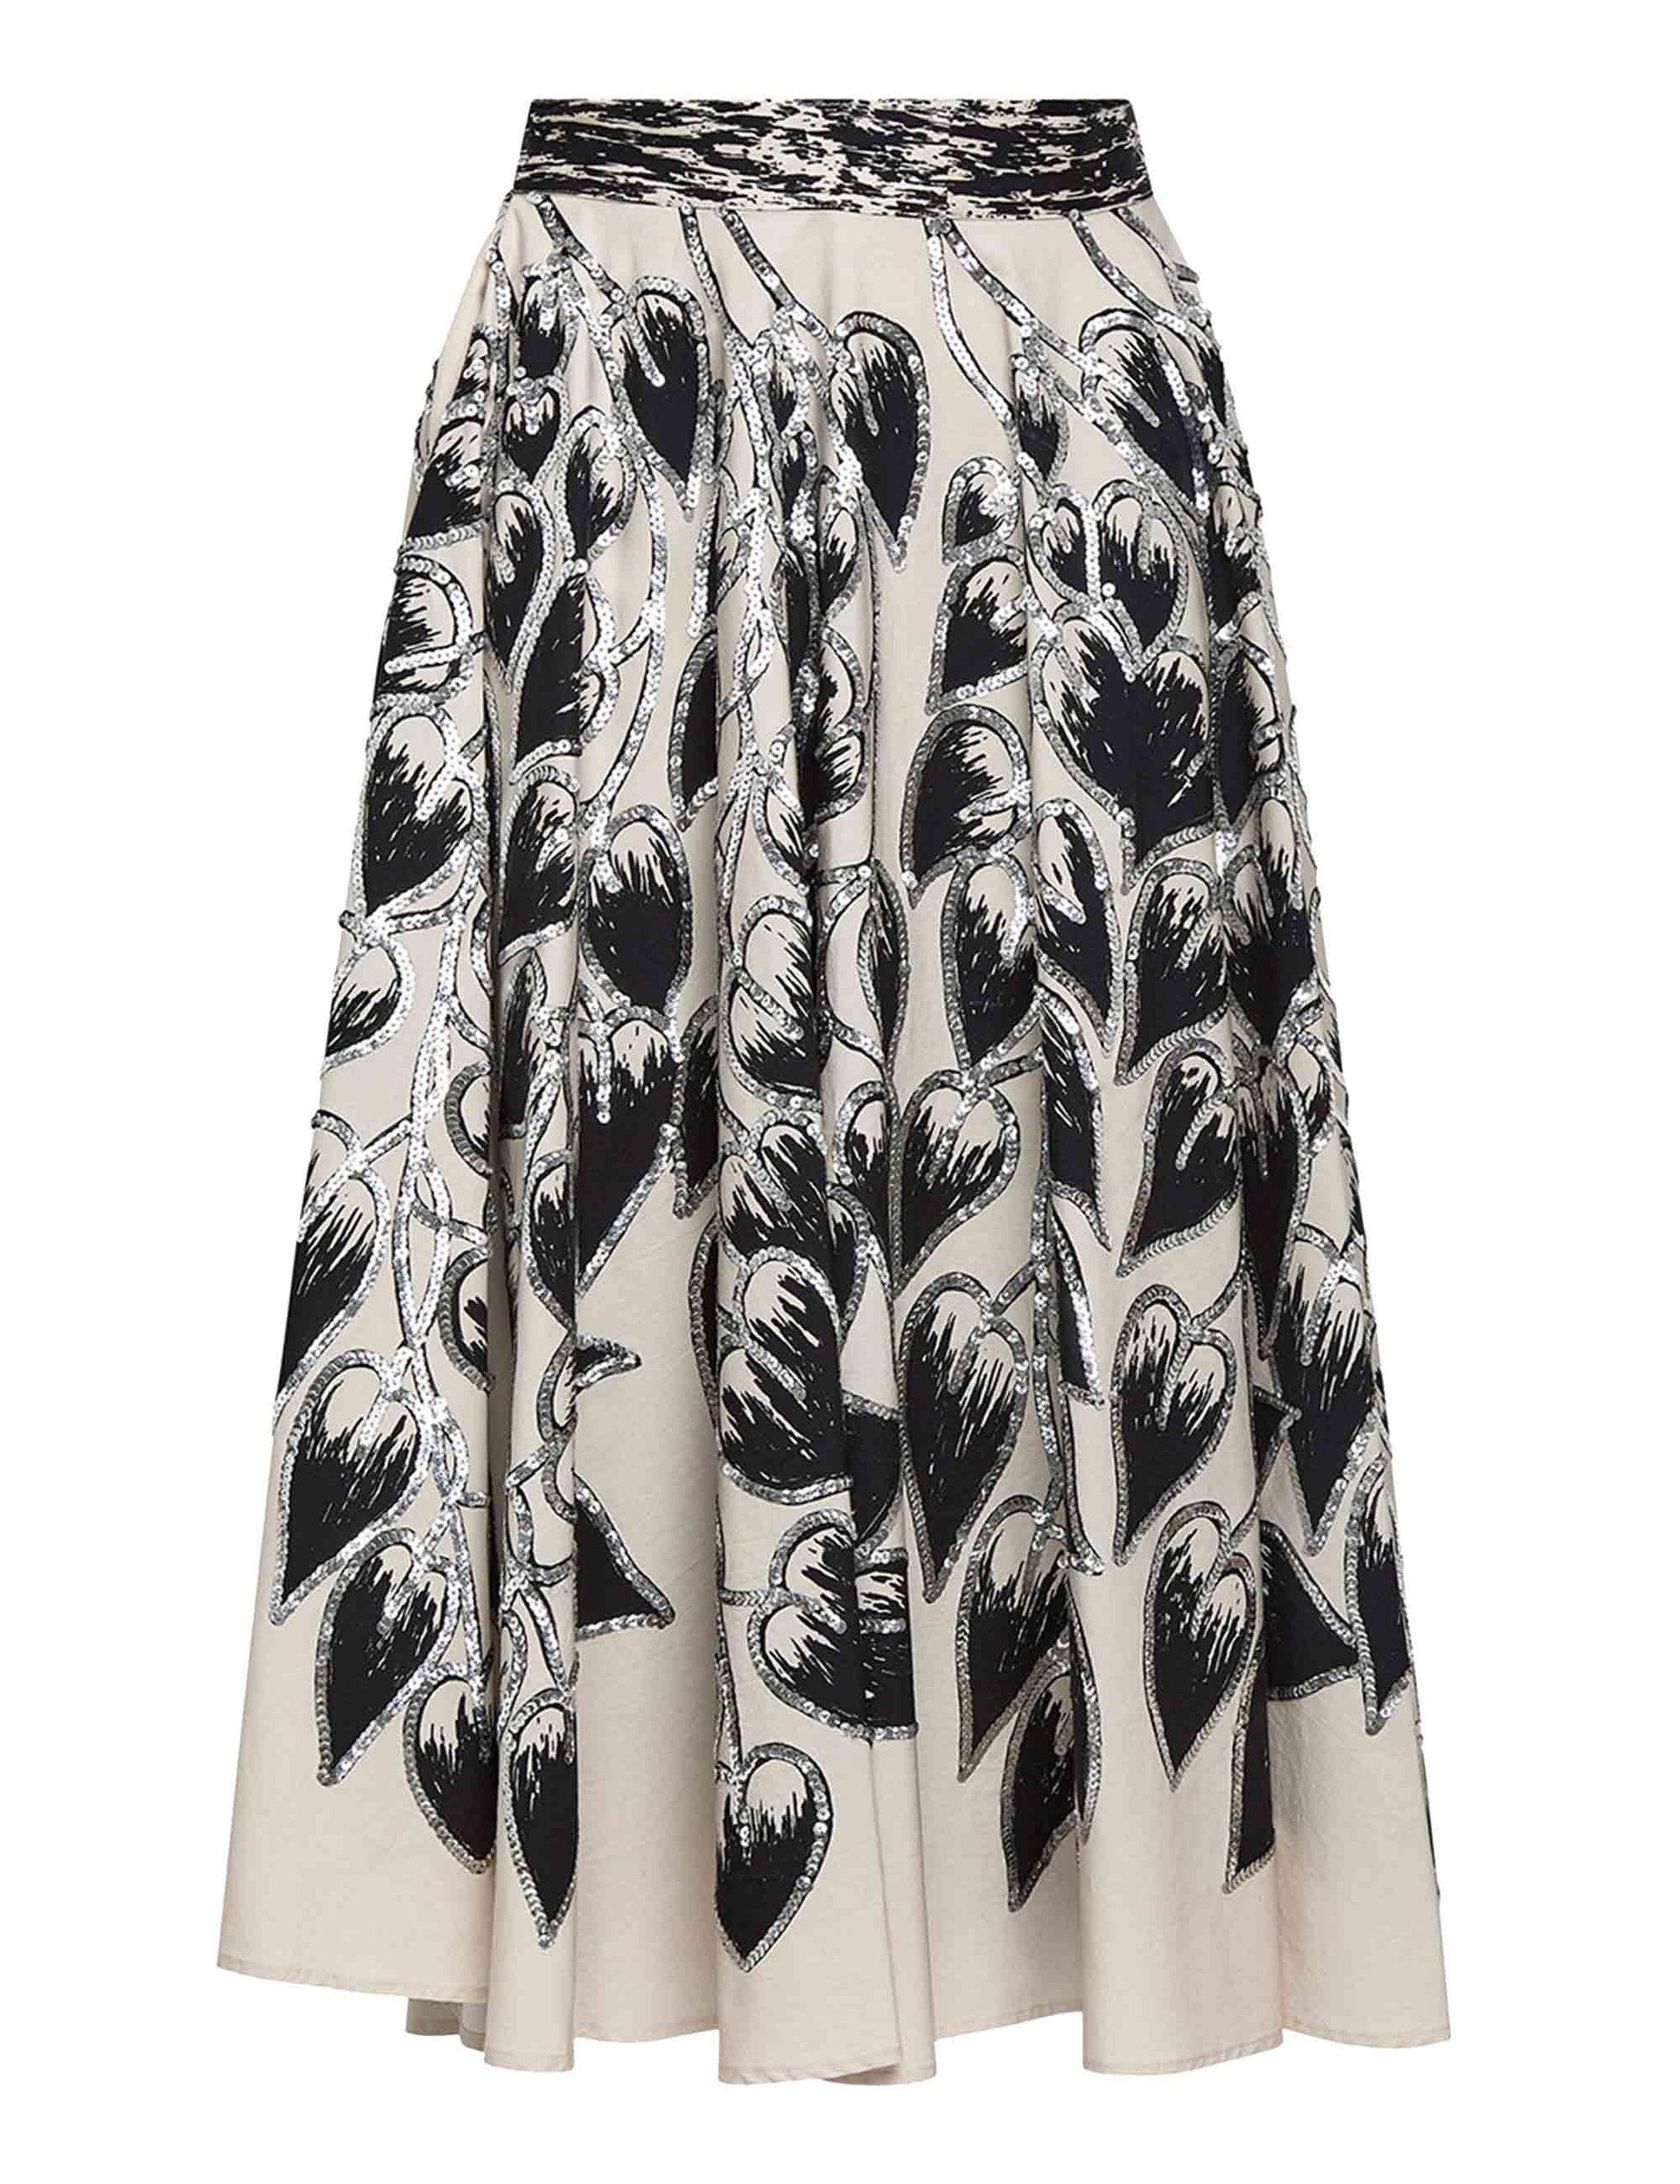 Archive Leaf Embroidery women's skirts in beige and black cotton